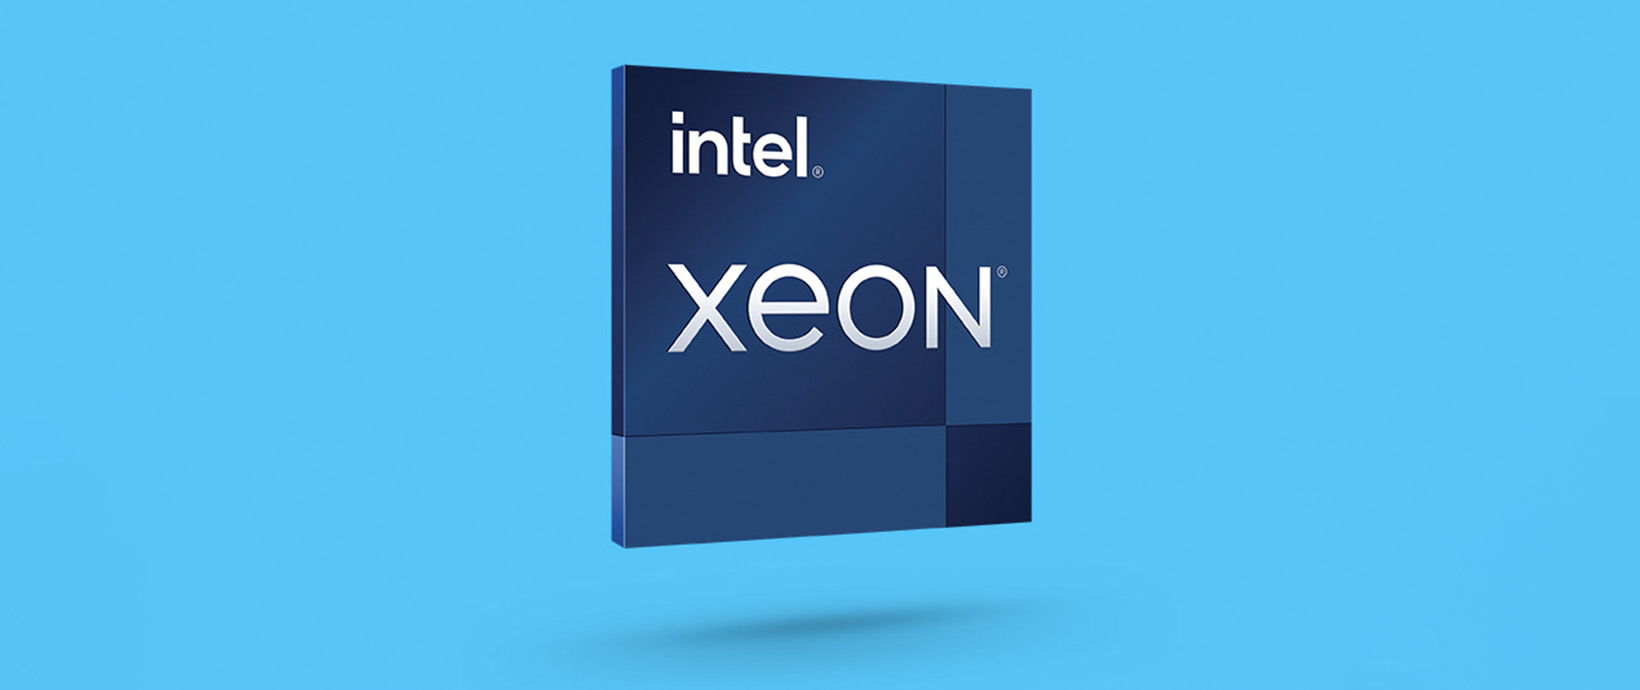 Achieving Breakthrough Performance with Altair CAE Solvers on the Latest Intel® Xeon® Processors